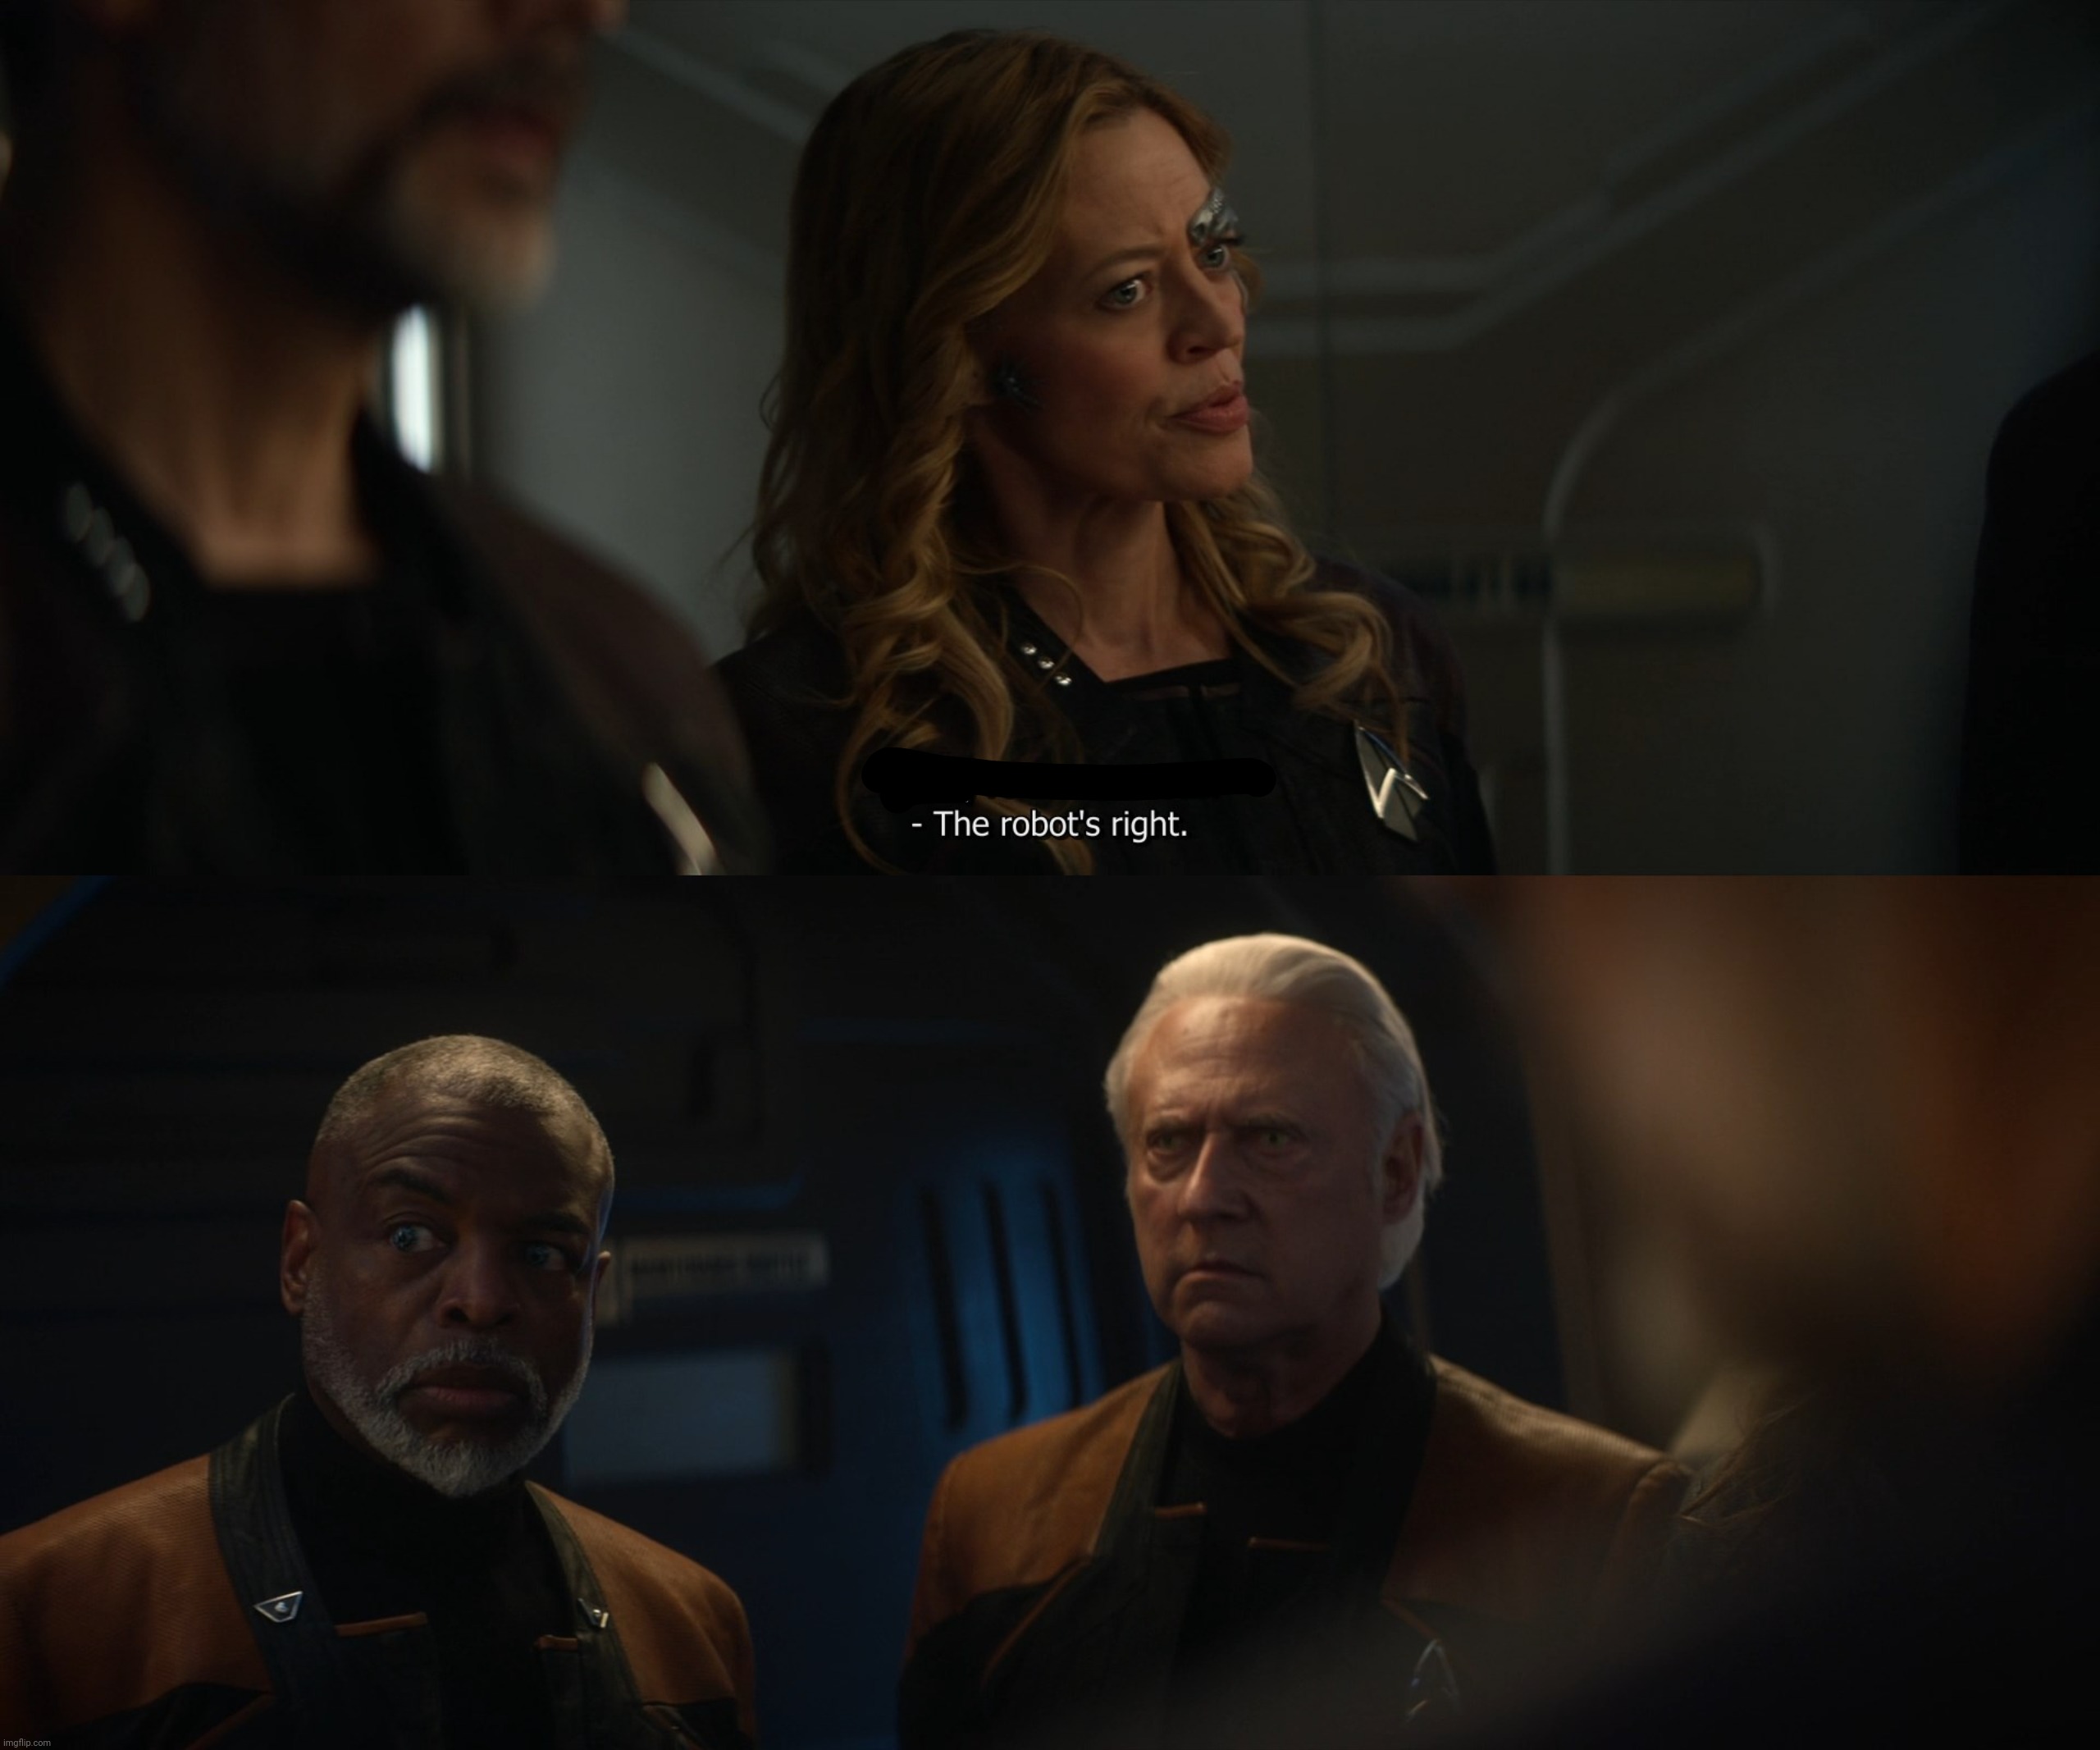 Excuse me? | image tagged in funny,wtf,picard wtf,seven of nine,star trek data,robot | made w/ Imgflip meme maker